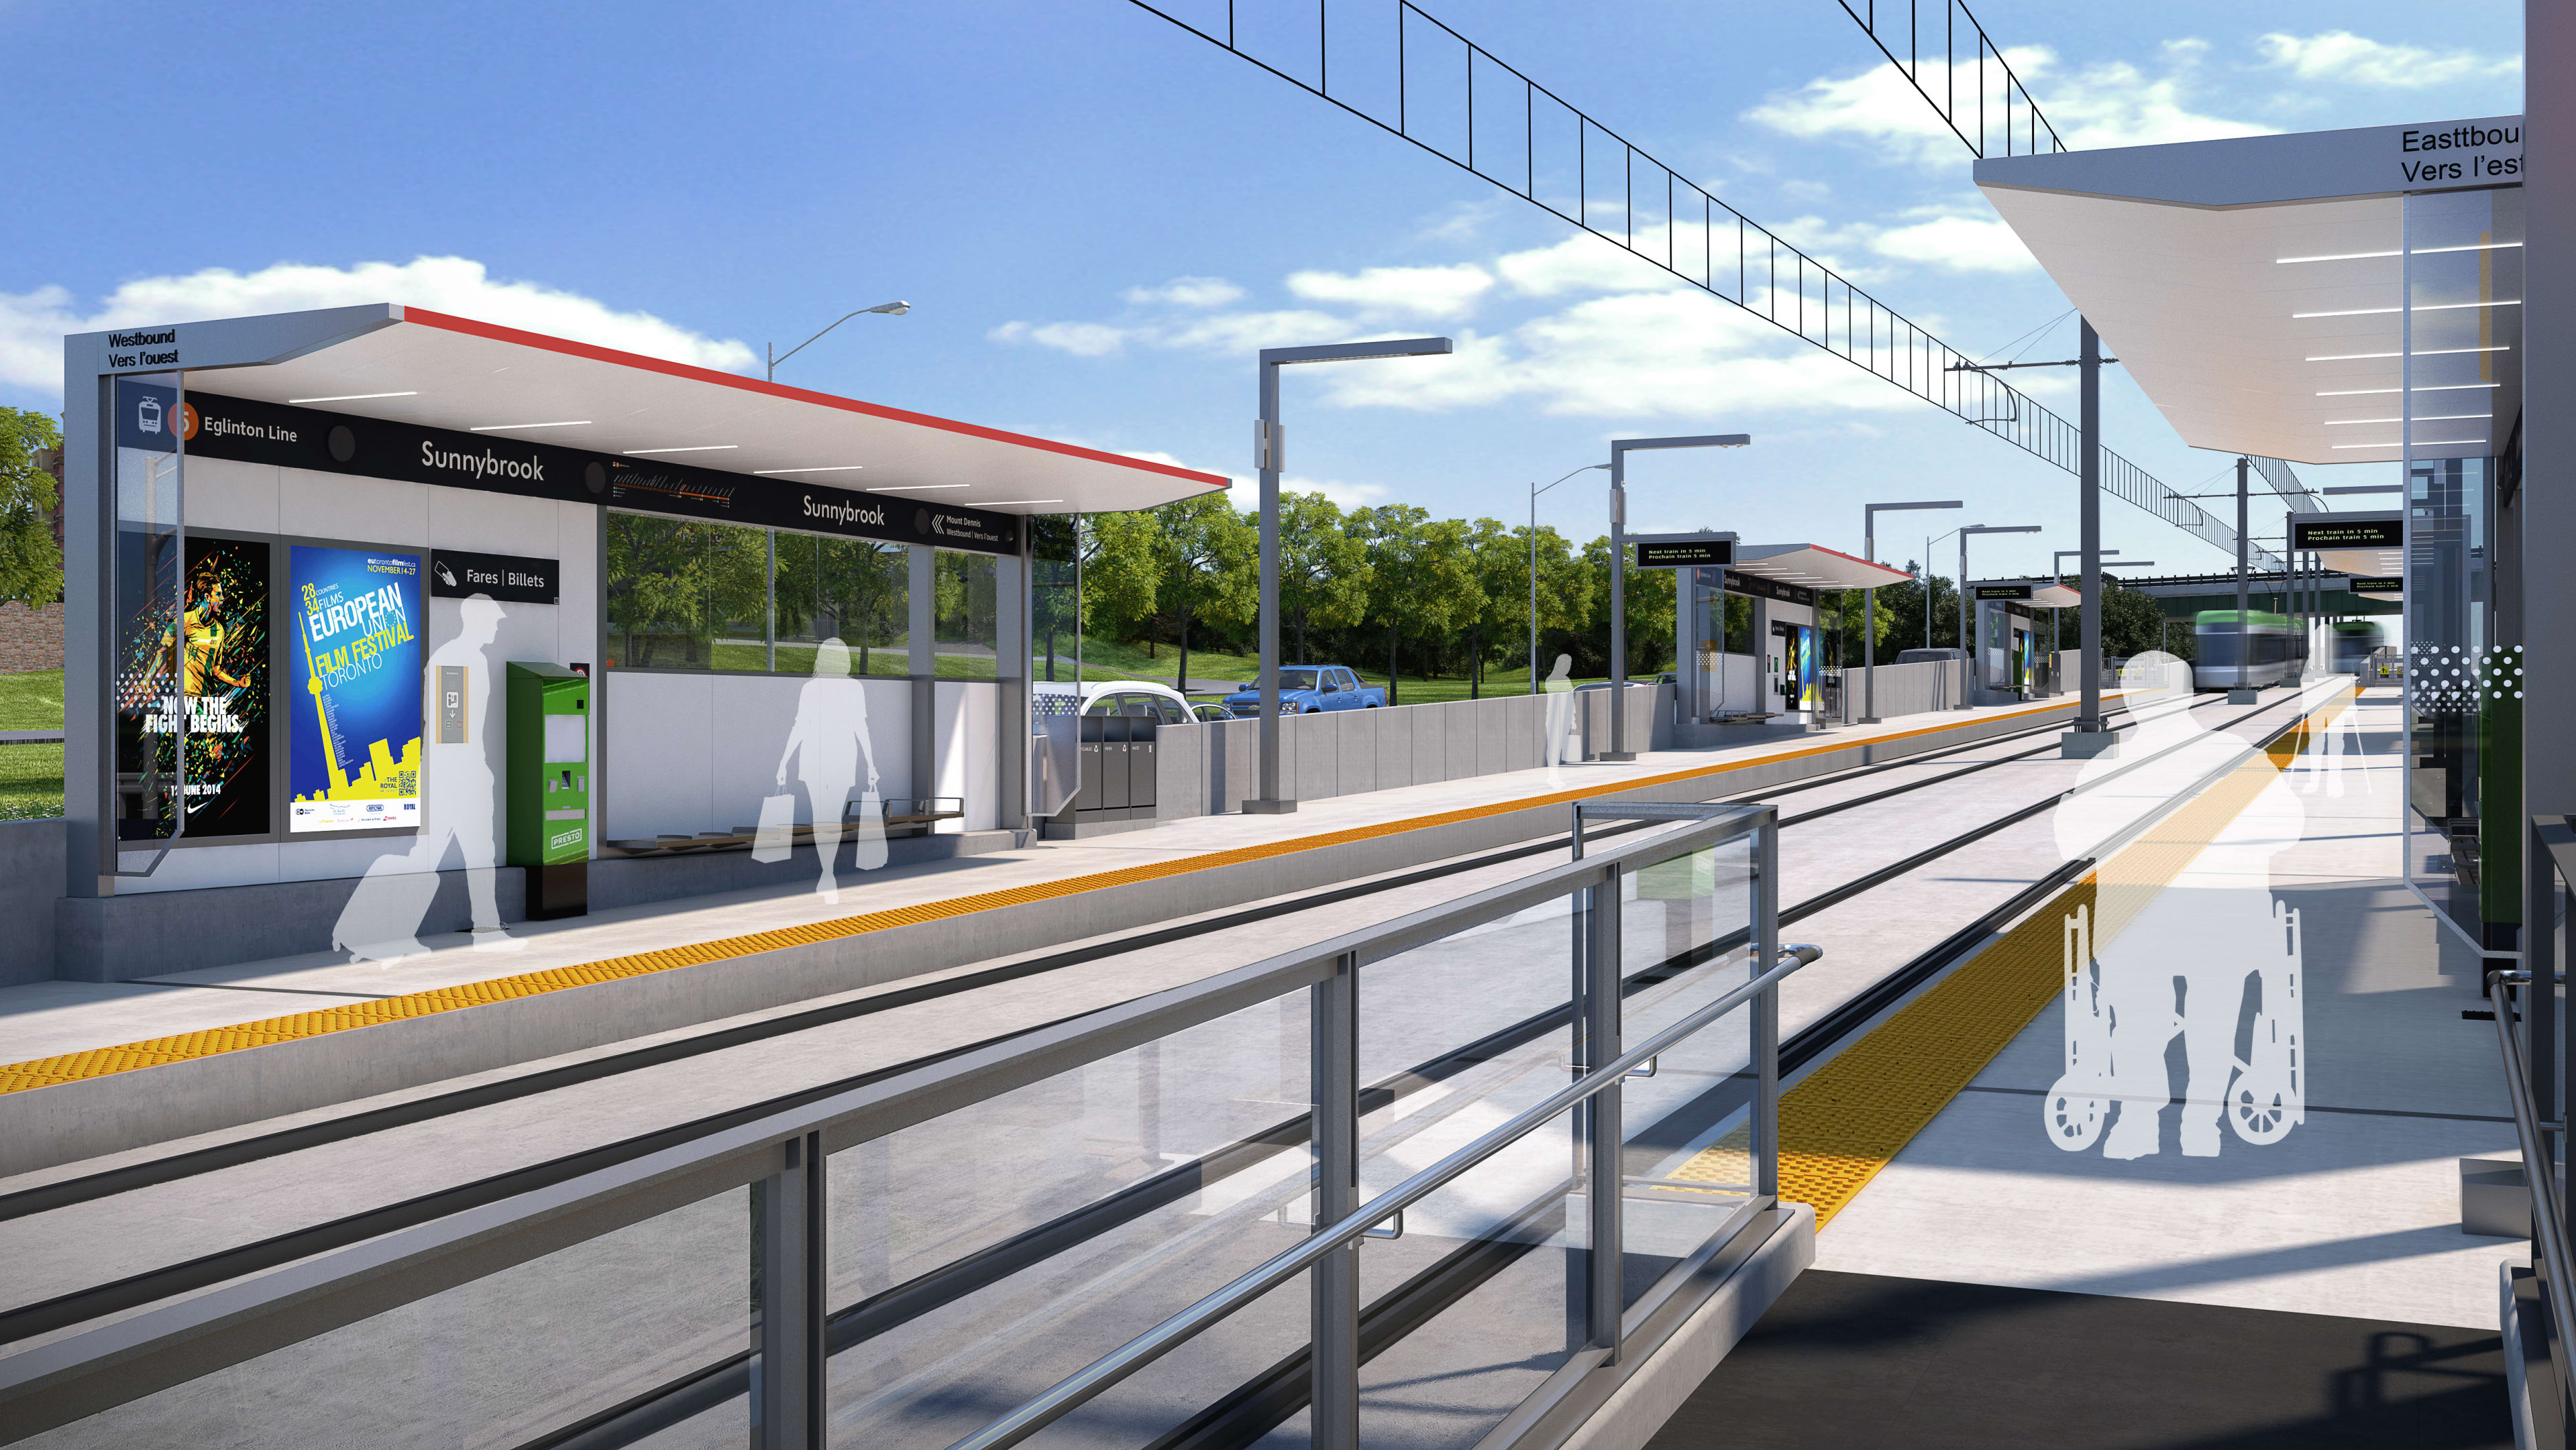 An artist concept shows customers waiting on the platform for an approaching LRT vehicle.